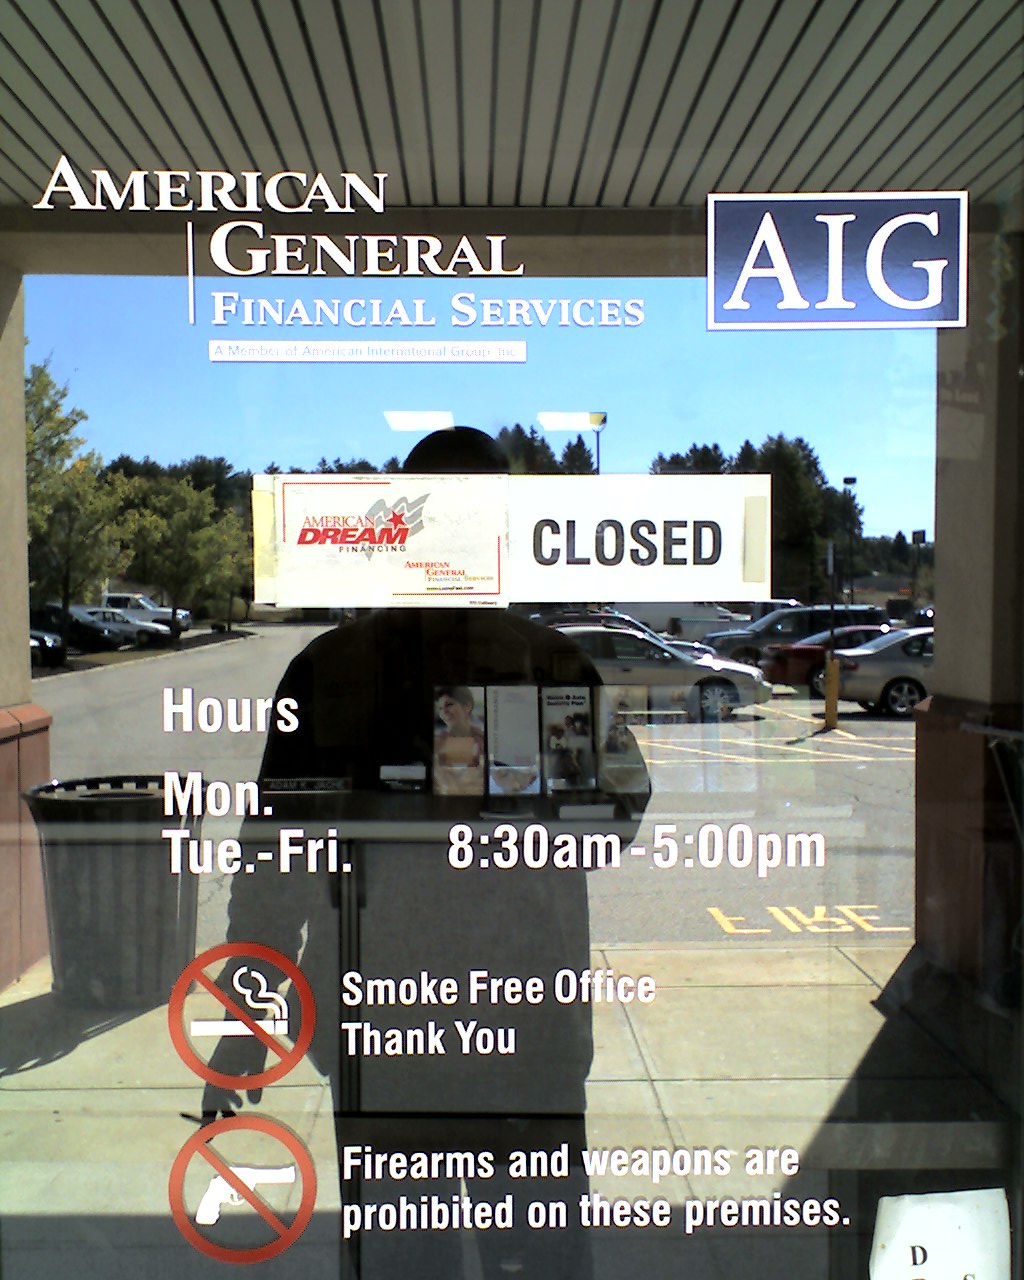 Hey Ernie,

Longtime fan- but never knew how to submit.

Check this out... back on 09/20/2008, when AIG was FIRST in trouble.  They just THOUGHT we forgot!
I love the sign... "the American Dream", is CLOSED.

It STILL IS, thanks to those butt-munching weasels.  we're paying bonuses to thieving bastards who wove this mess, in the hopes they'l